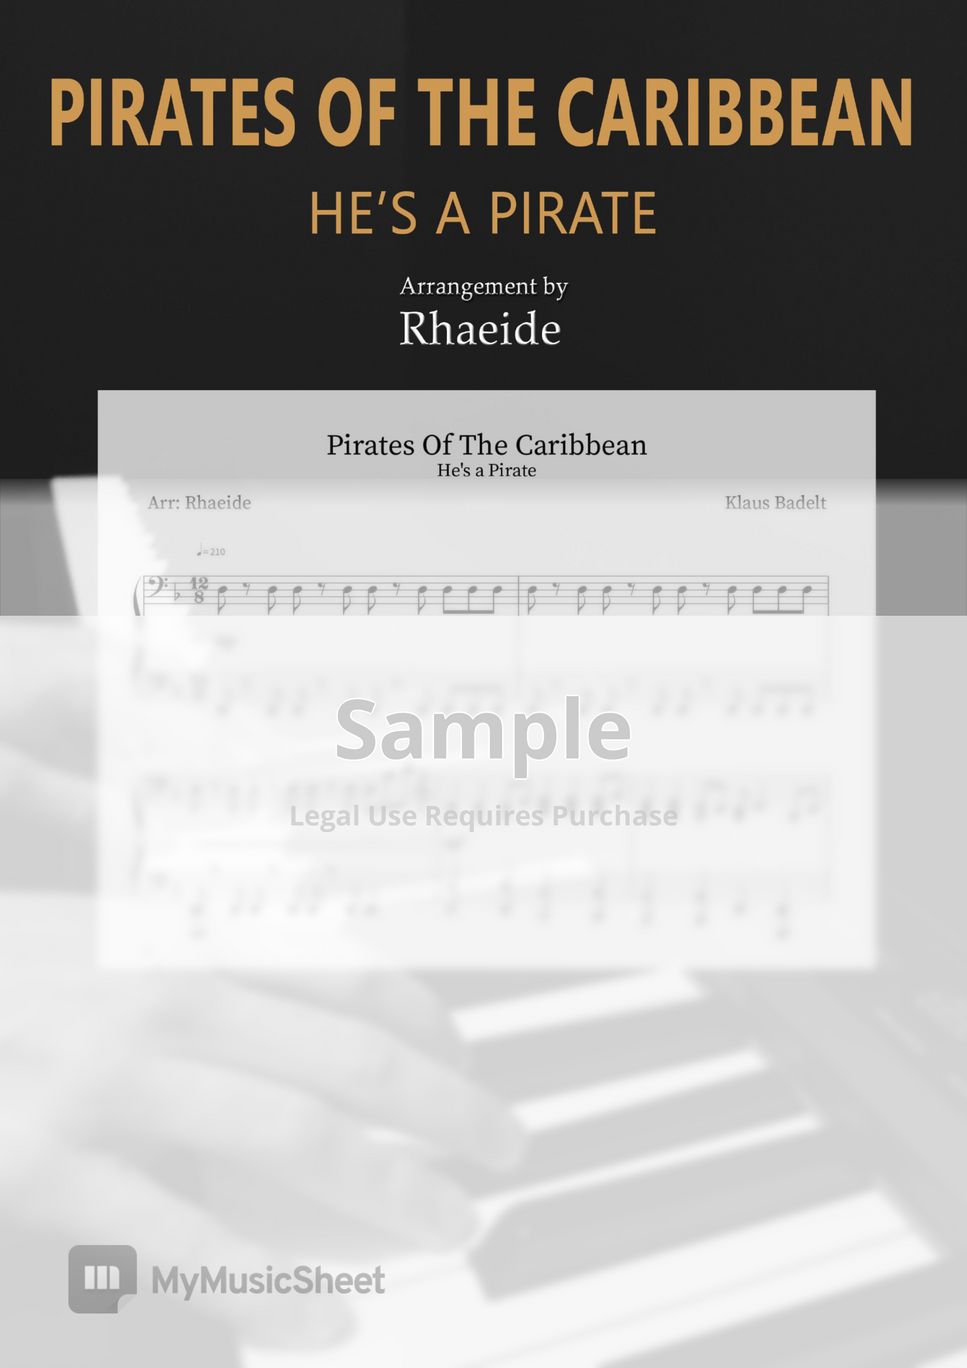 Pirates of the Caribbean - He's a Pirate (Klaus Badelt) by Rhaeide